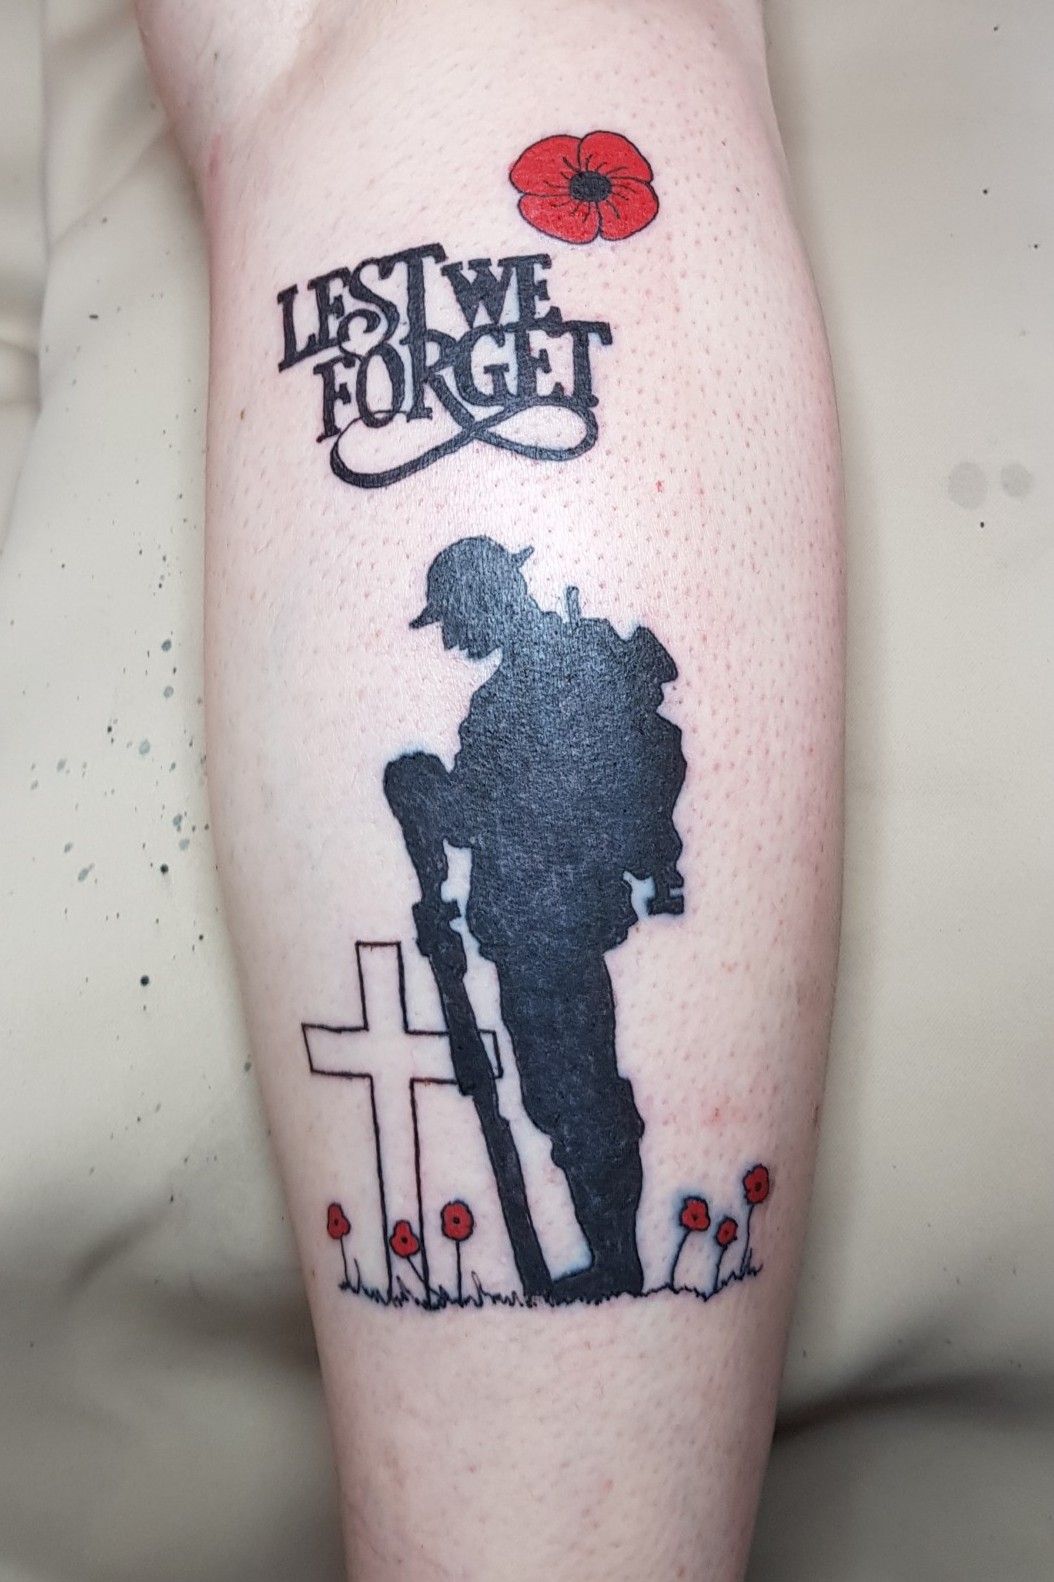 Tattoo uploaded by Chris Dreadfullrat  Lest we forget lestweforget  memorial soldiers poppies uksoldiers glasgow  Tattoodo